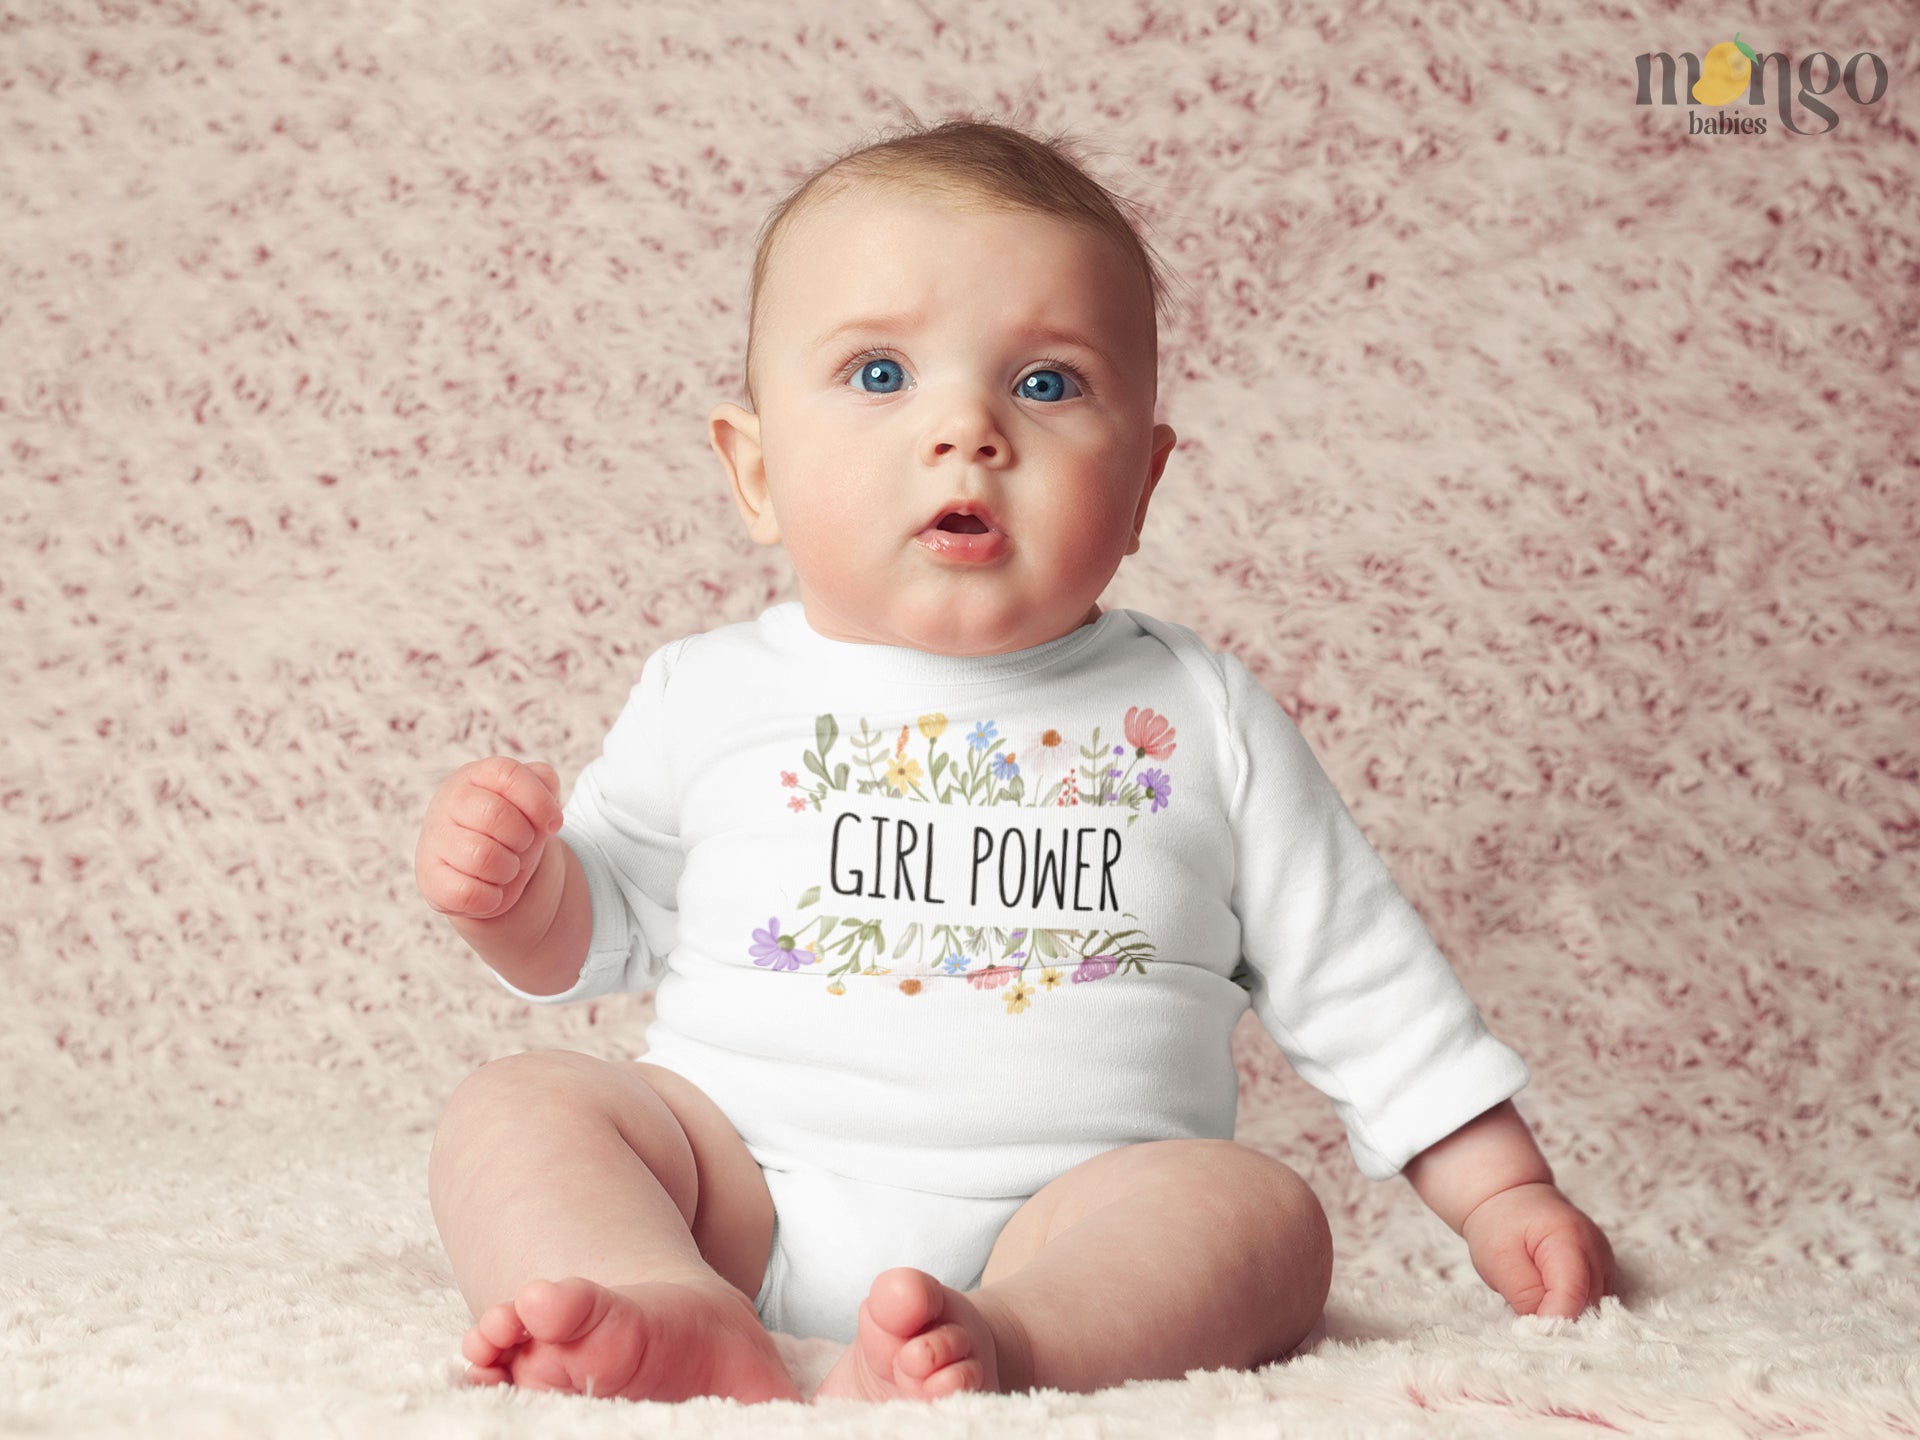 Long Sleeve Baby Onesie featuring a captivating floral frame graphic and empowering text 'Girl Power.' Ideal for young girls celebrating confidence and strength. 